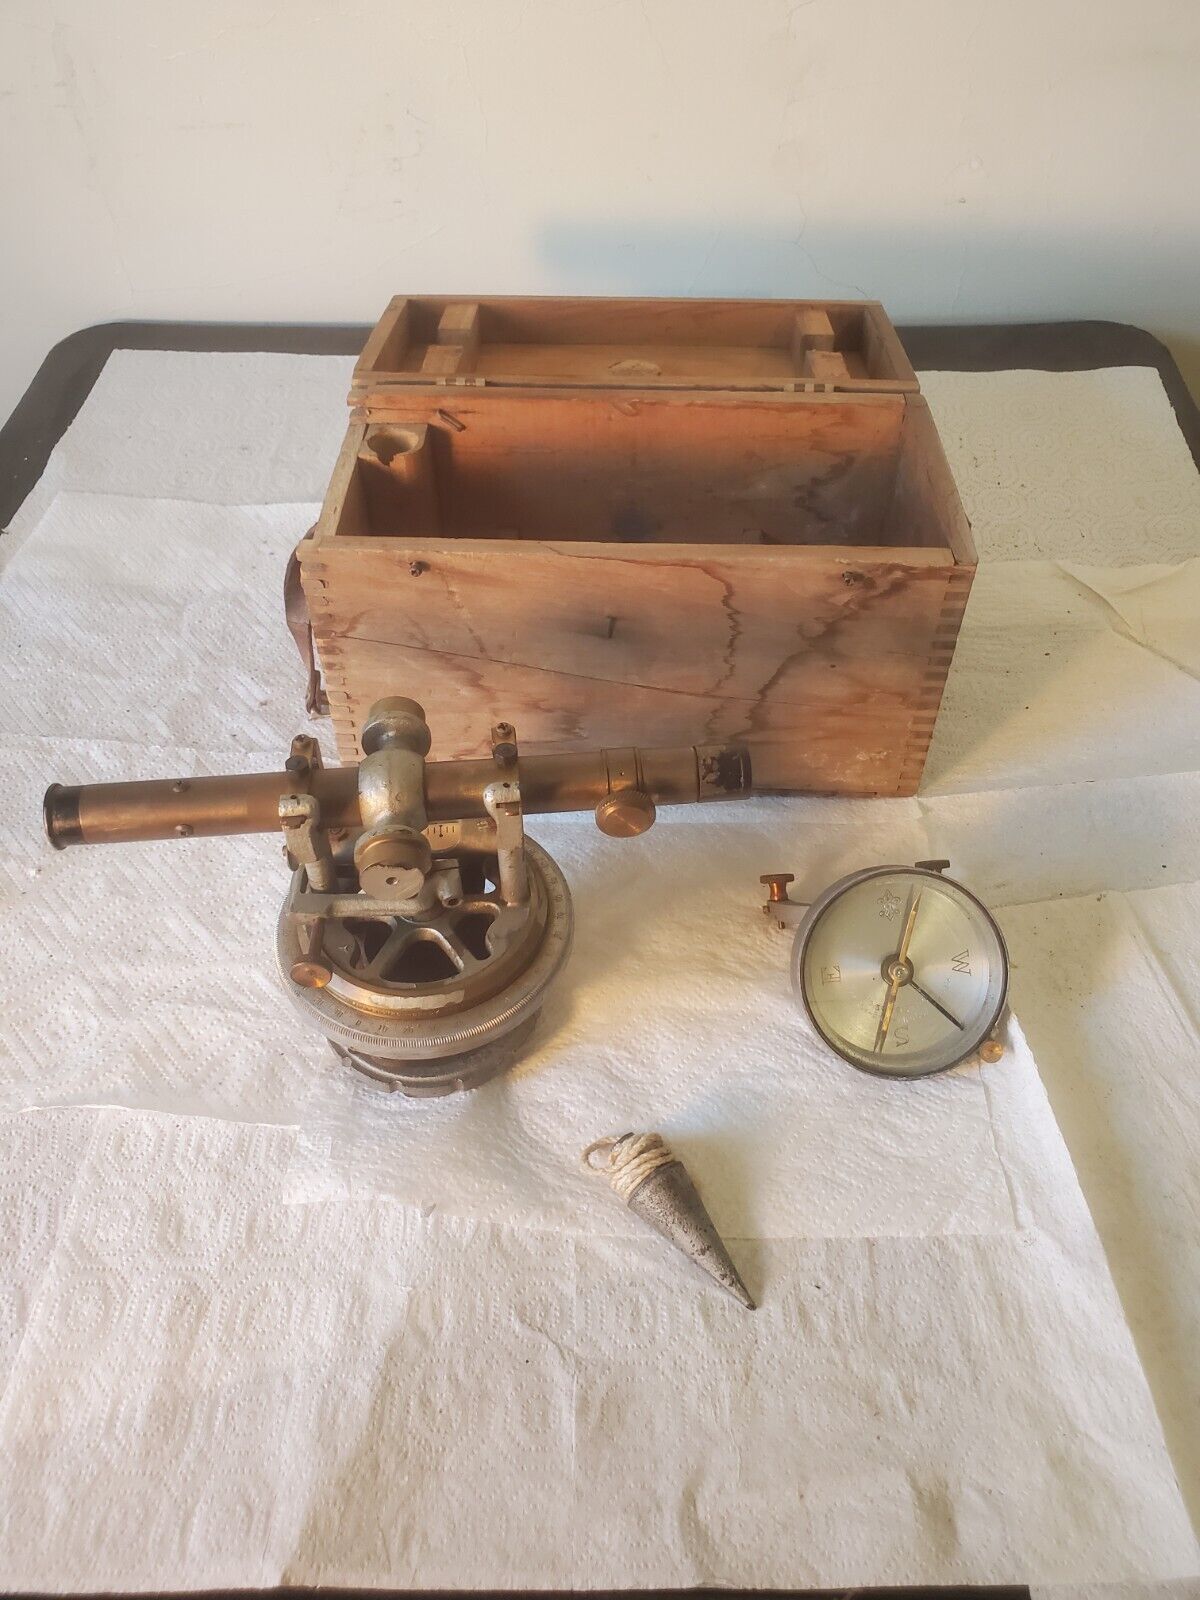 Surveyors Transit Bostrom Model 5 With Compass & Plumbob Rough Wooden Box 